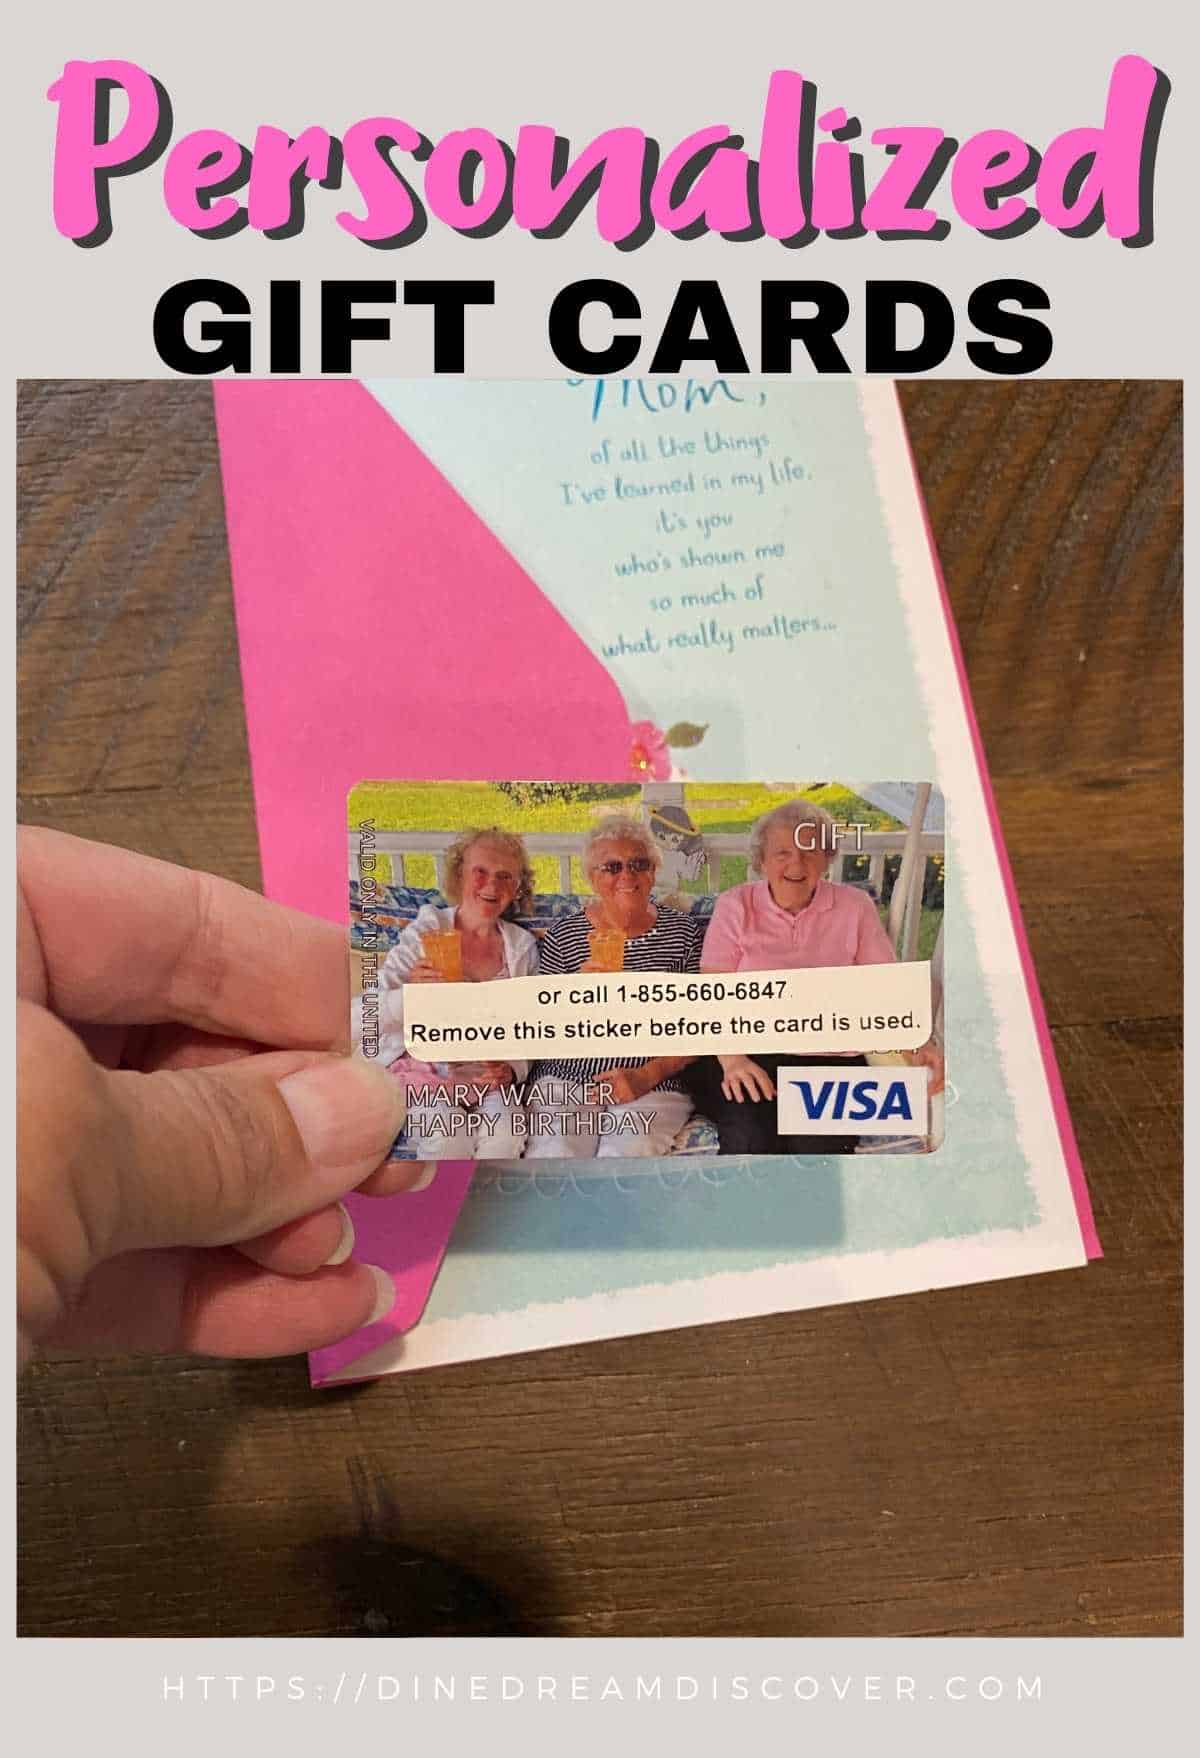 Granny blog | GiftCardGranny | Tax refund, Income tax, Shopping hacks